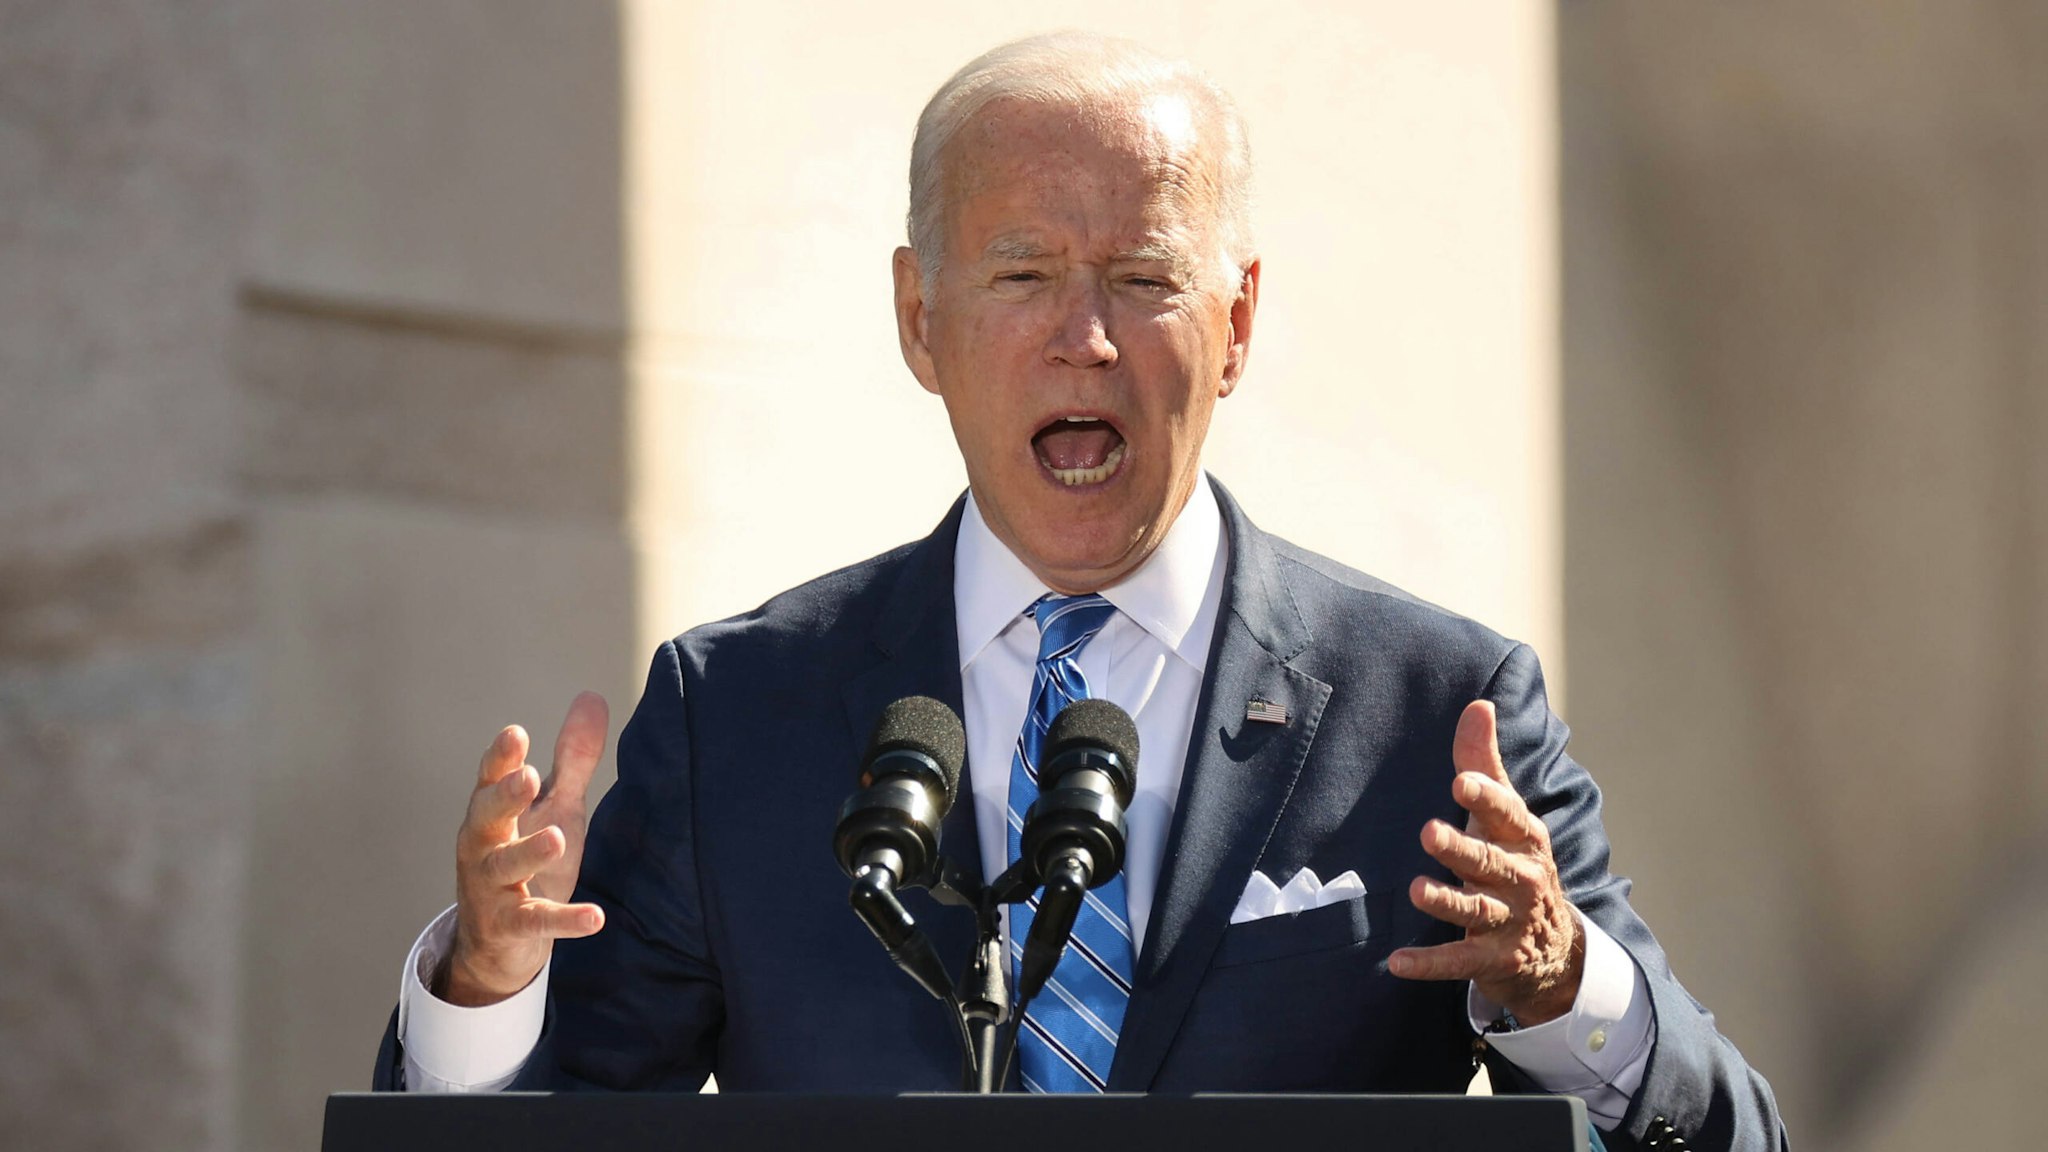 WASHINGTON, DC - OCTOBER 21: U.S. President Joe Biden delivers remarks during the 10th anniversary celebration of the Martin Luther King, Jr. Memorial near the Tidal Basin on the National Mall on October 21, 2021 in Washington, DC. Biden attended the memorial's dedication ceremony in 2011 with then President Barack Obama who delivered the keynote address.